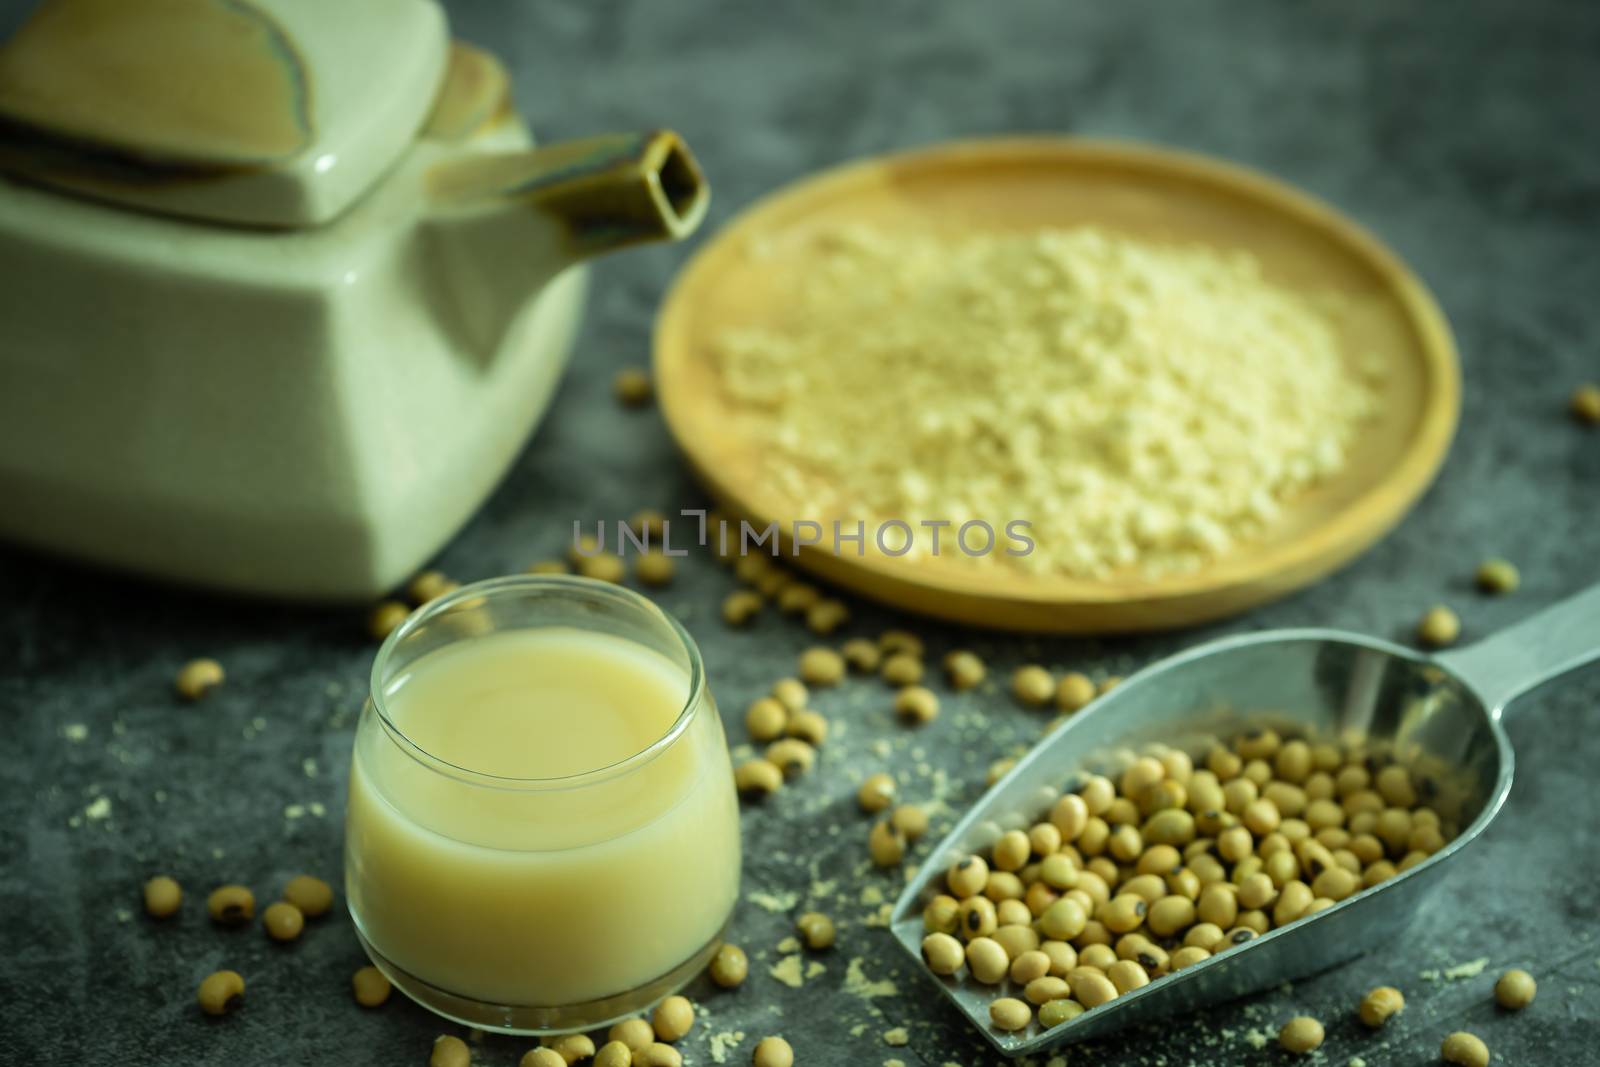 Soymilk in the glass and the kettle is placed beside. Soybean powder is crushed in a wooden dish and has scattered soy beans on the table in morning light.